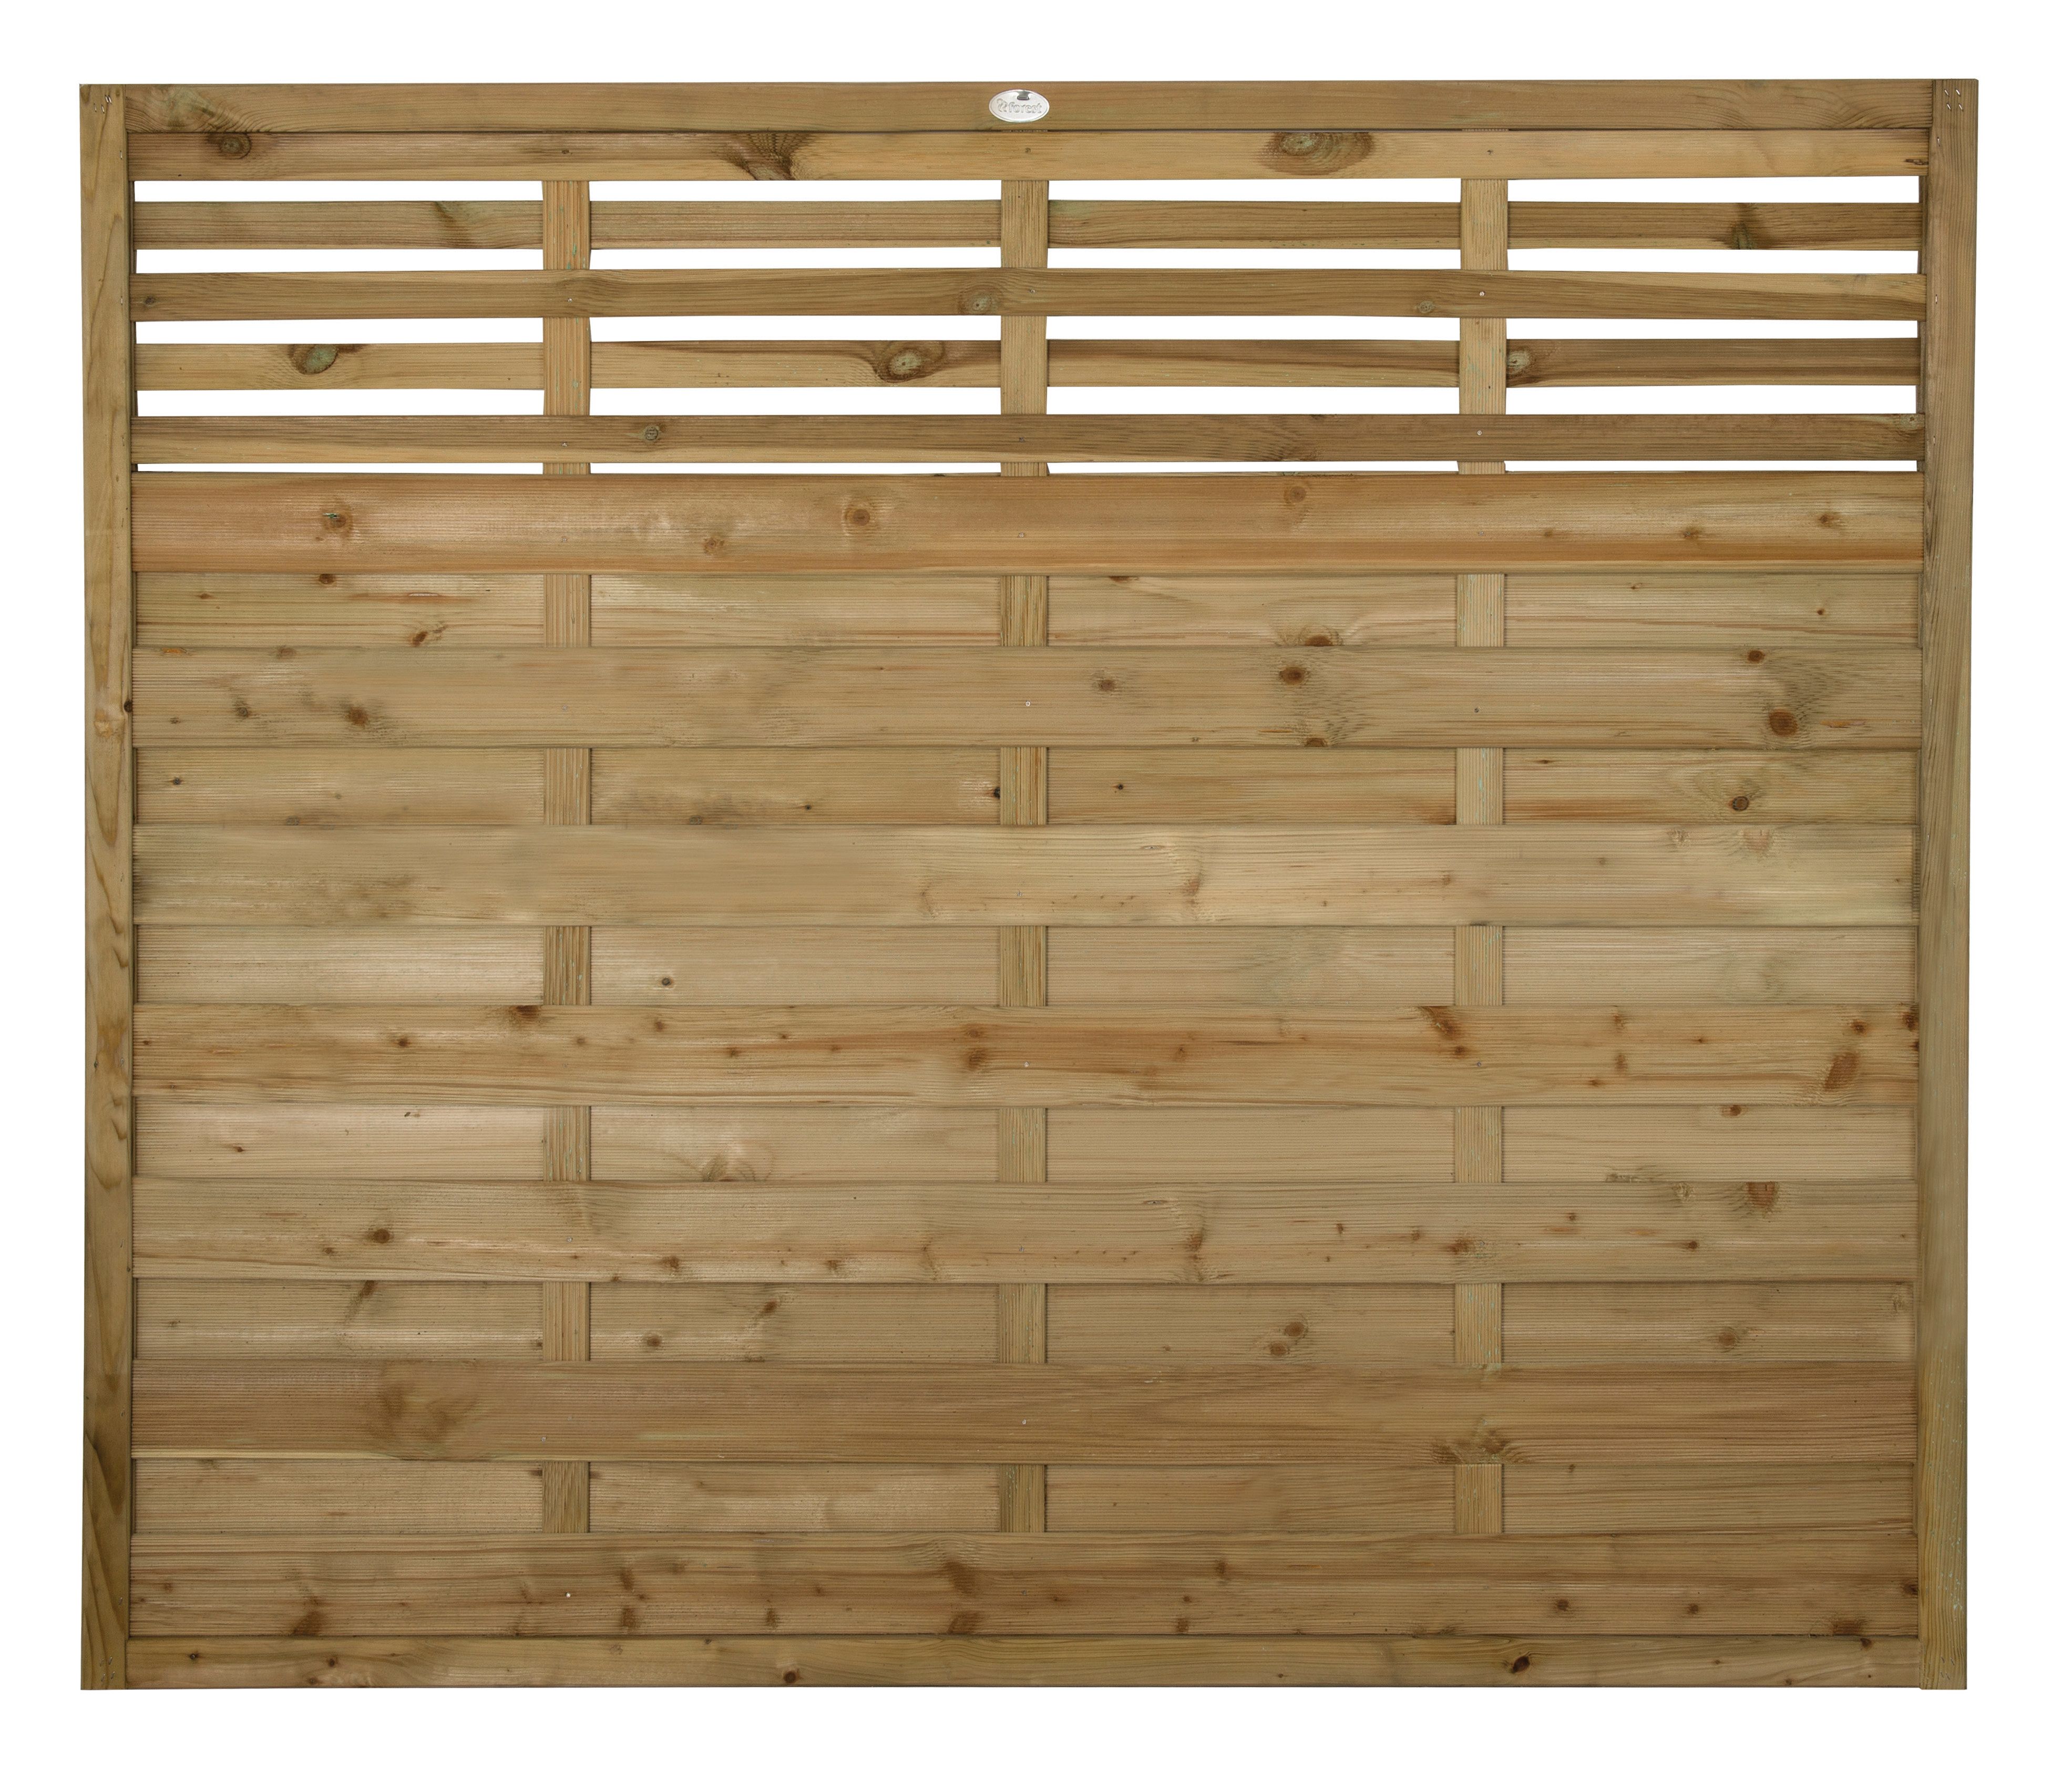 Image of Forest Garden Pressure Treated Kyoto Fence Panel - 1800 x 1500mm - 6 x 5ft - Pack of 3